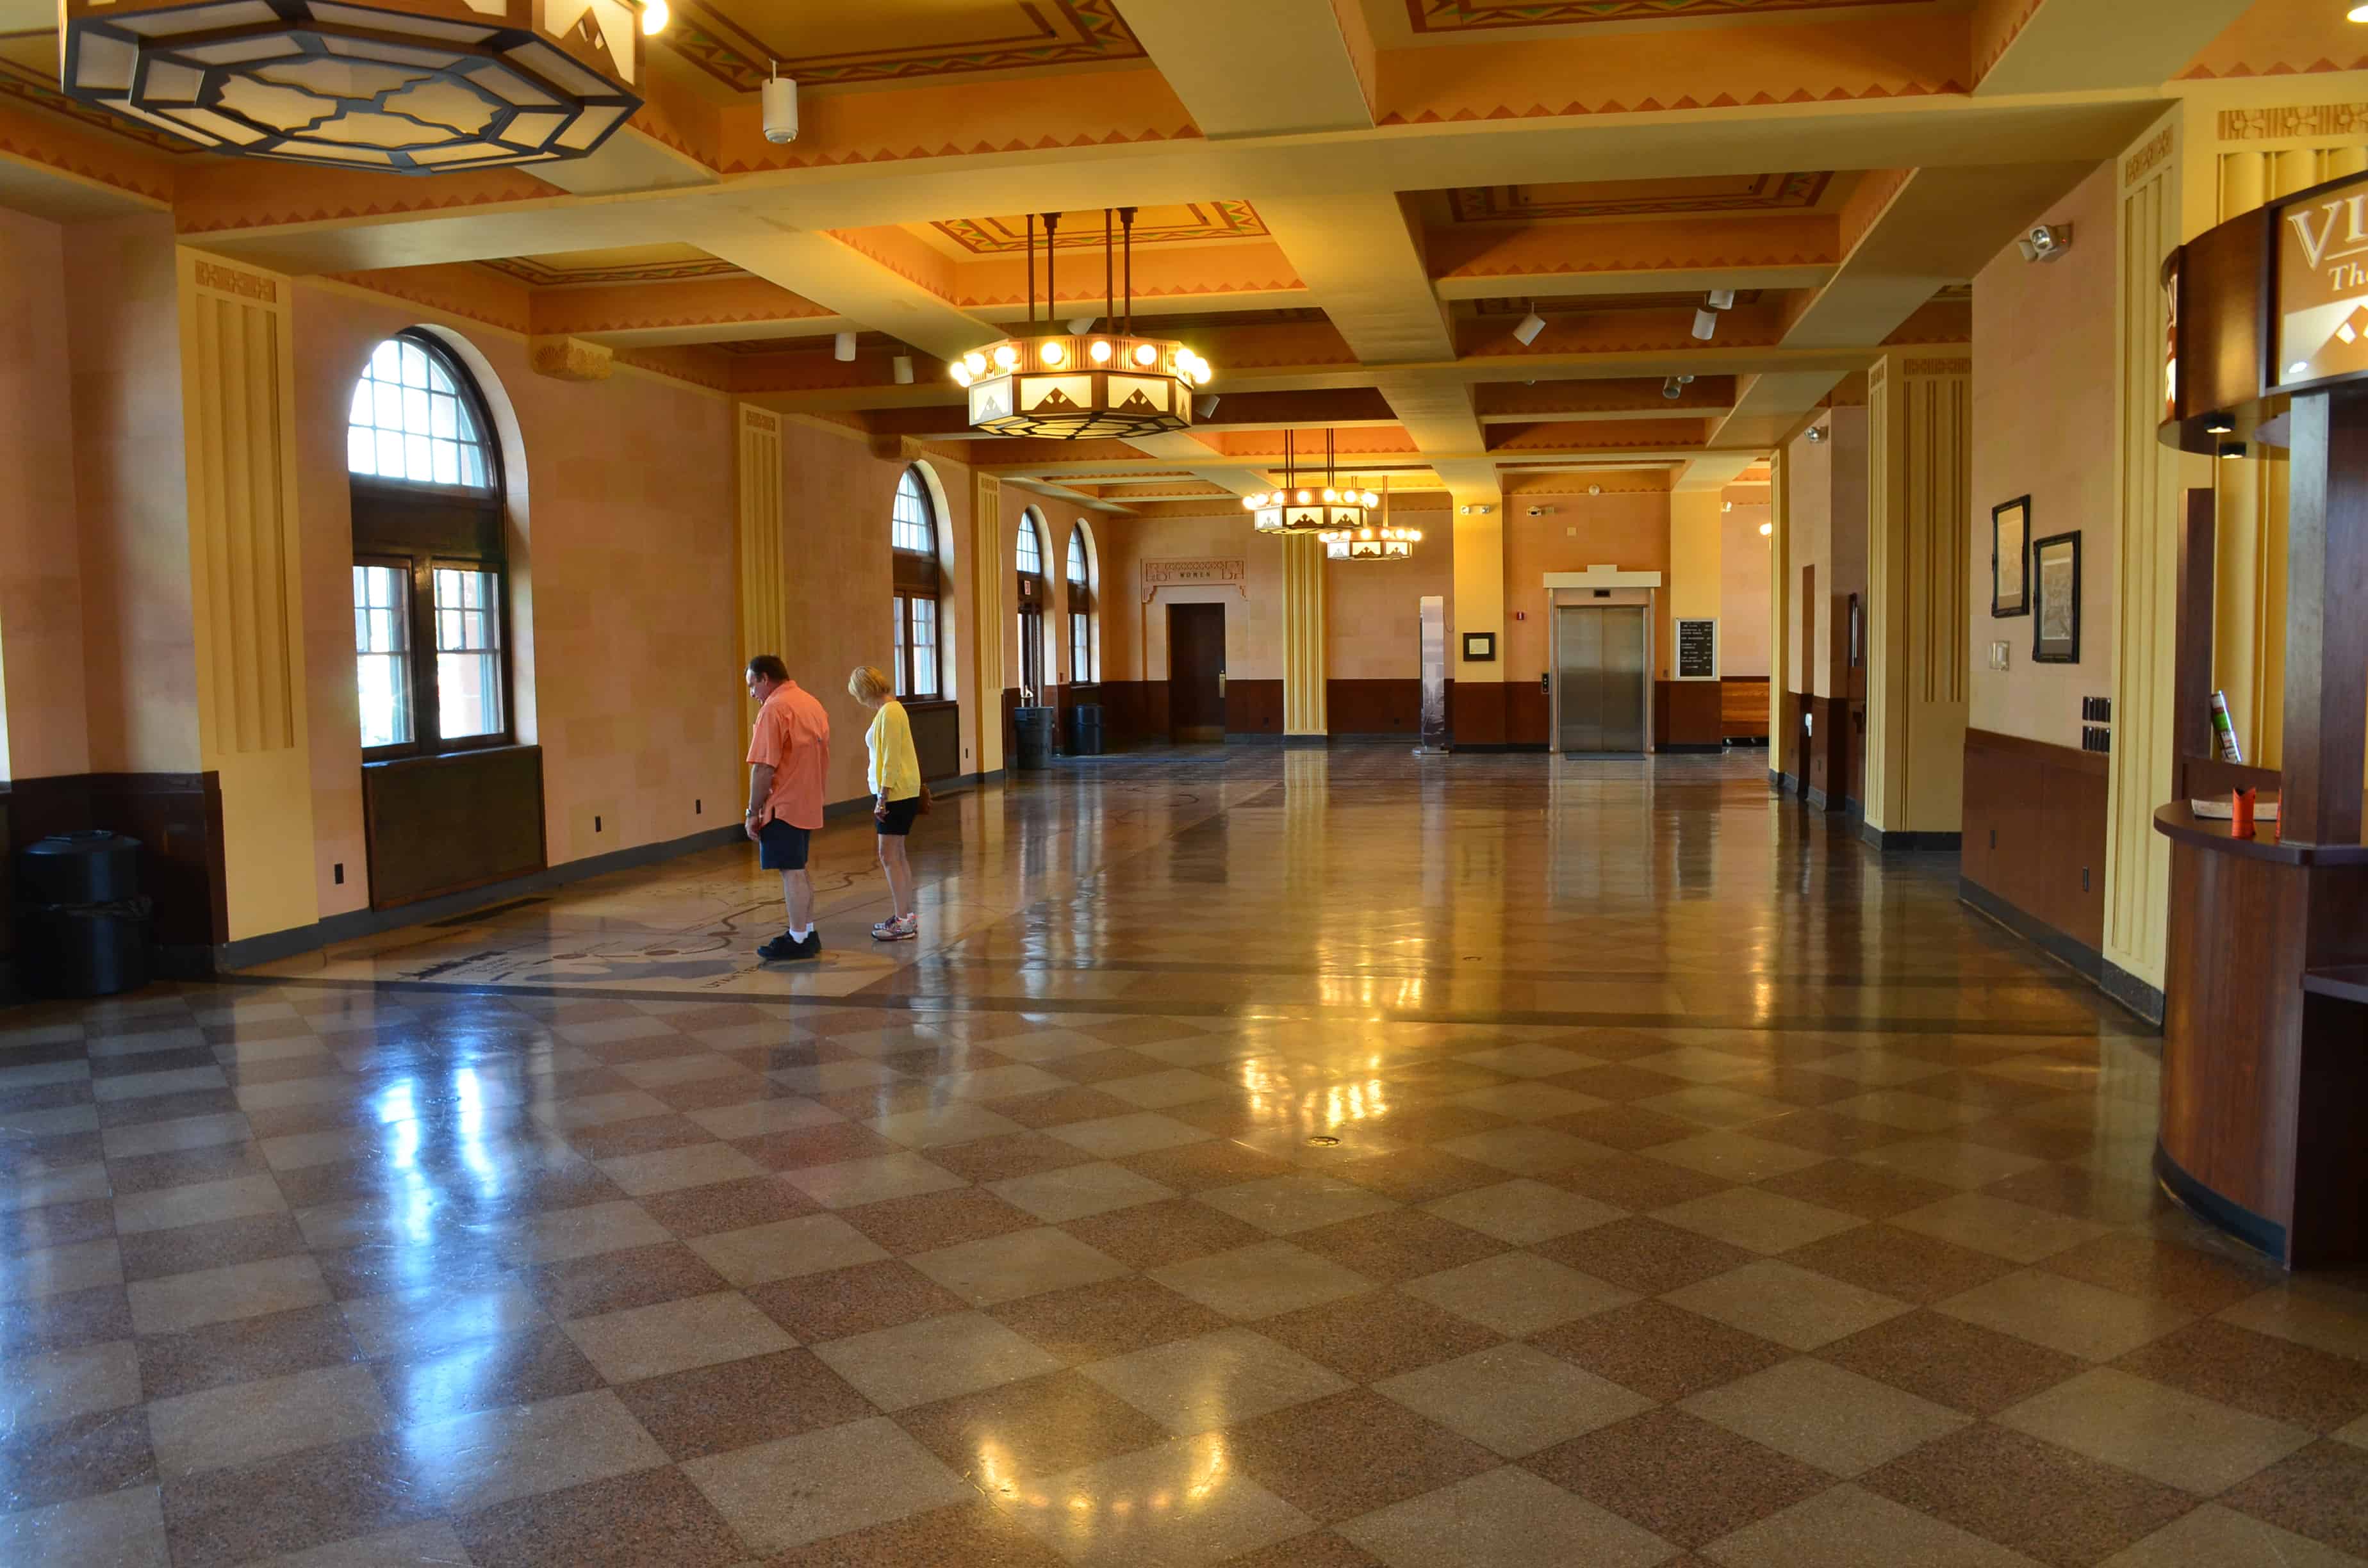 Lobby at the Cheyenne Depot in Wyoming